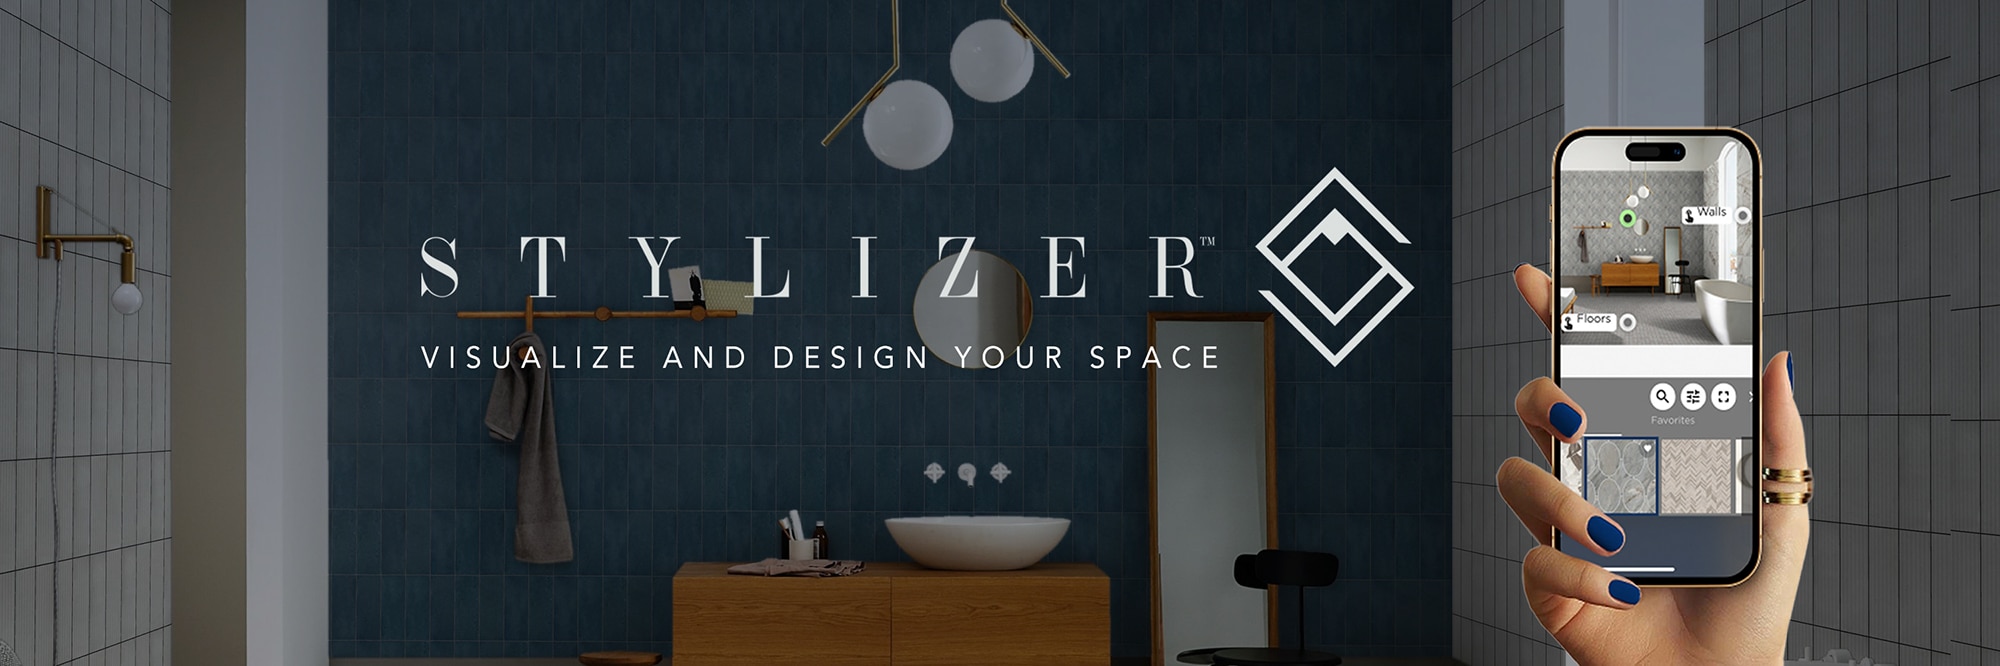 Stylizer: Visualize and Design Your Space